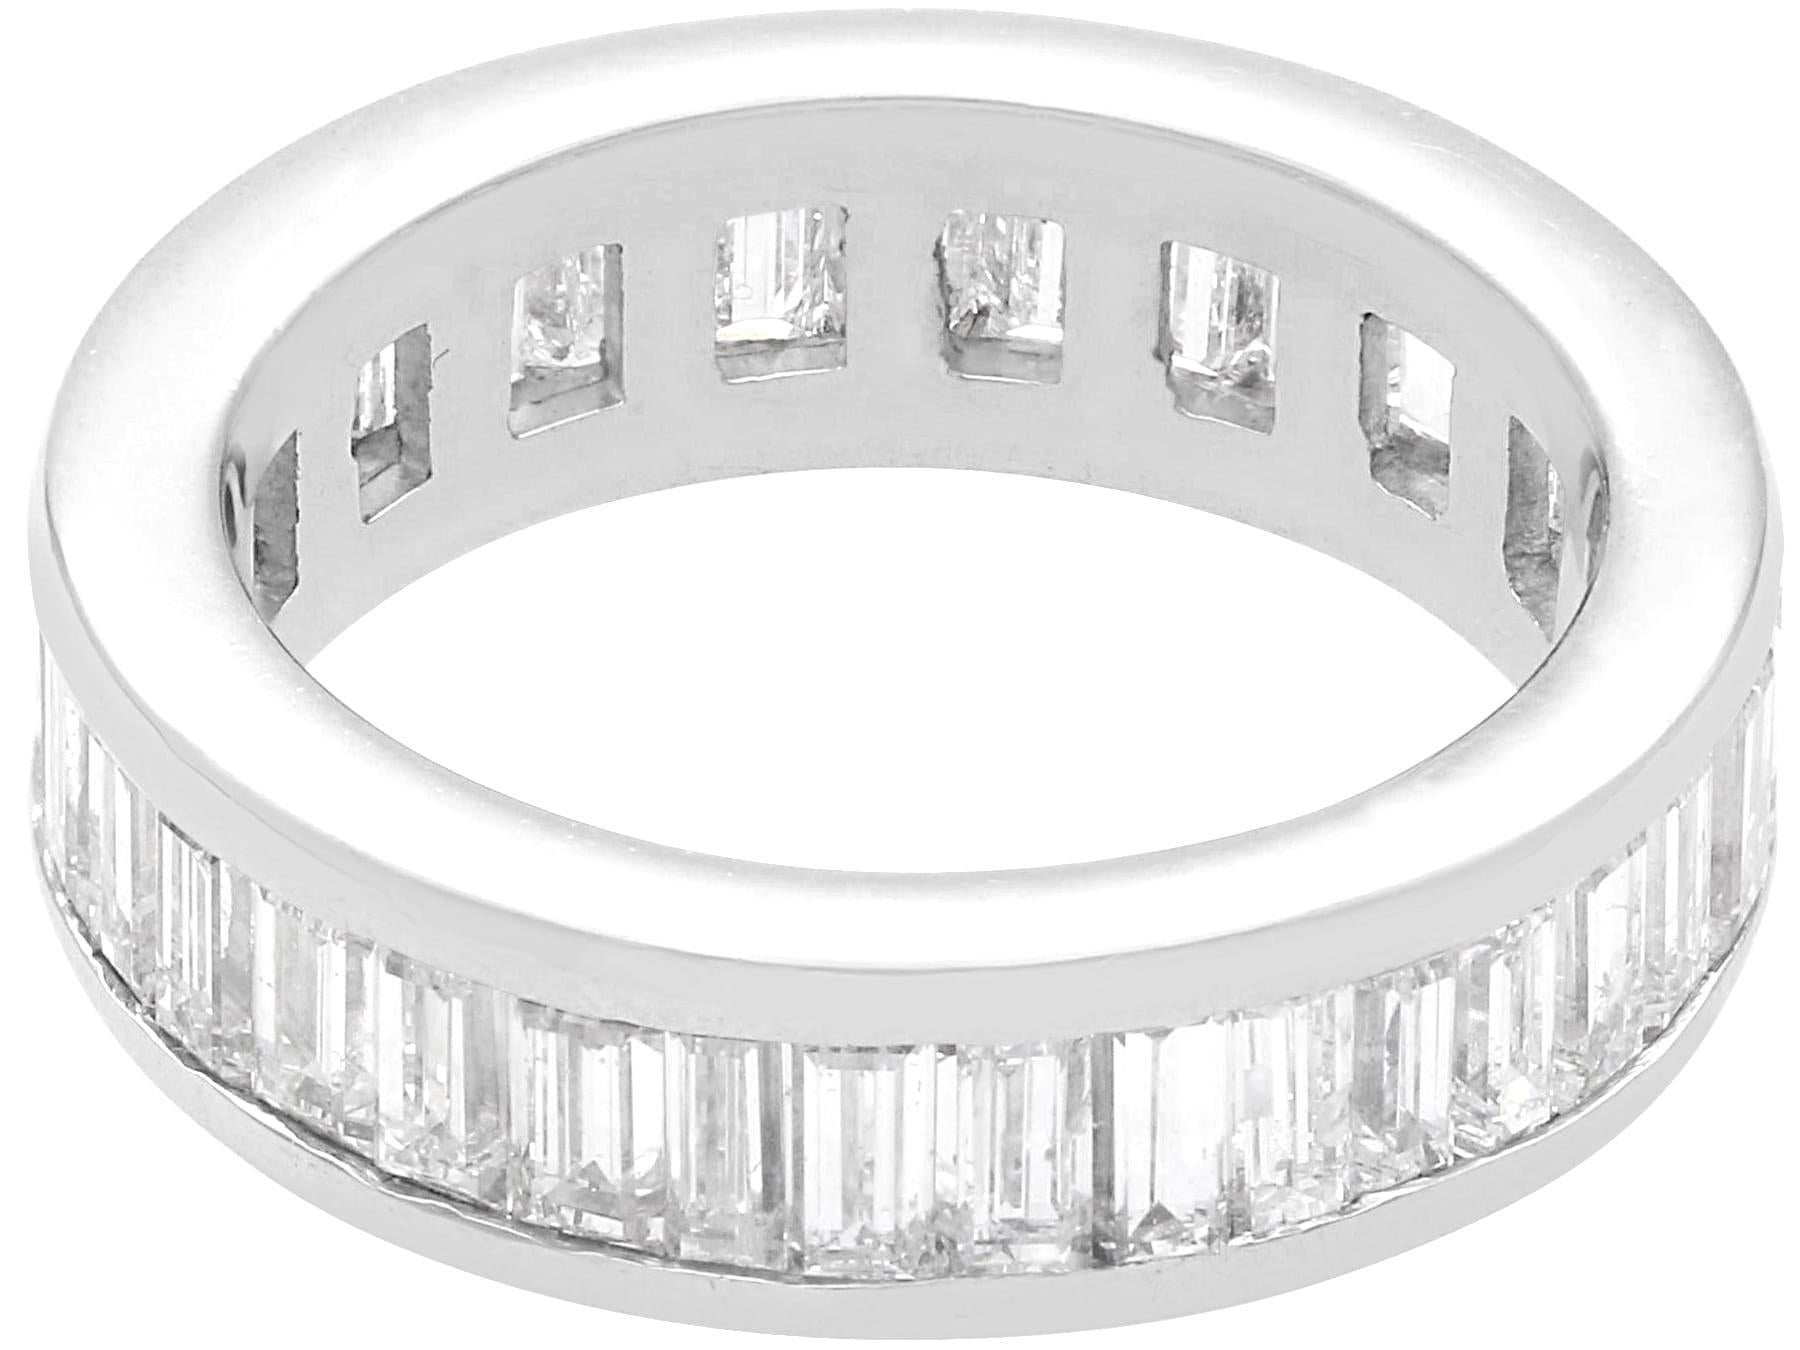 Antique 3.50 Carat Diamond and White Gold Full Eternity Ring In Excellent Condition For Sale In Jesmond, Newcastle Upon Tyne